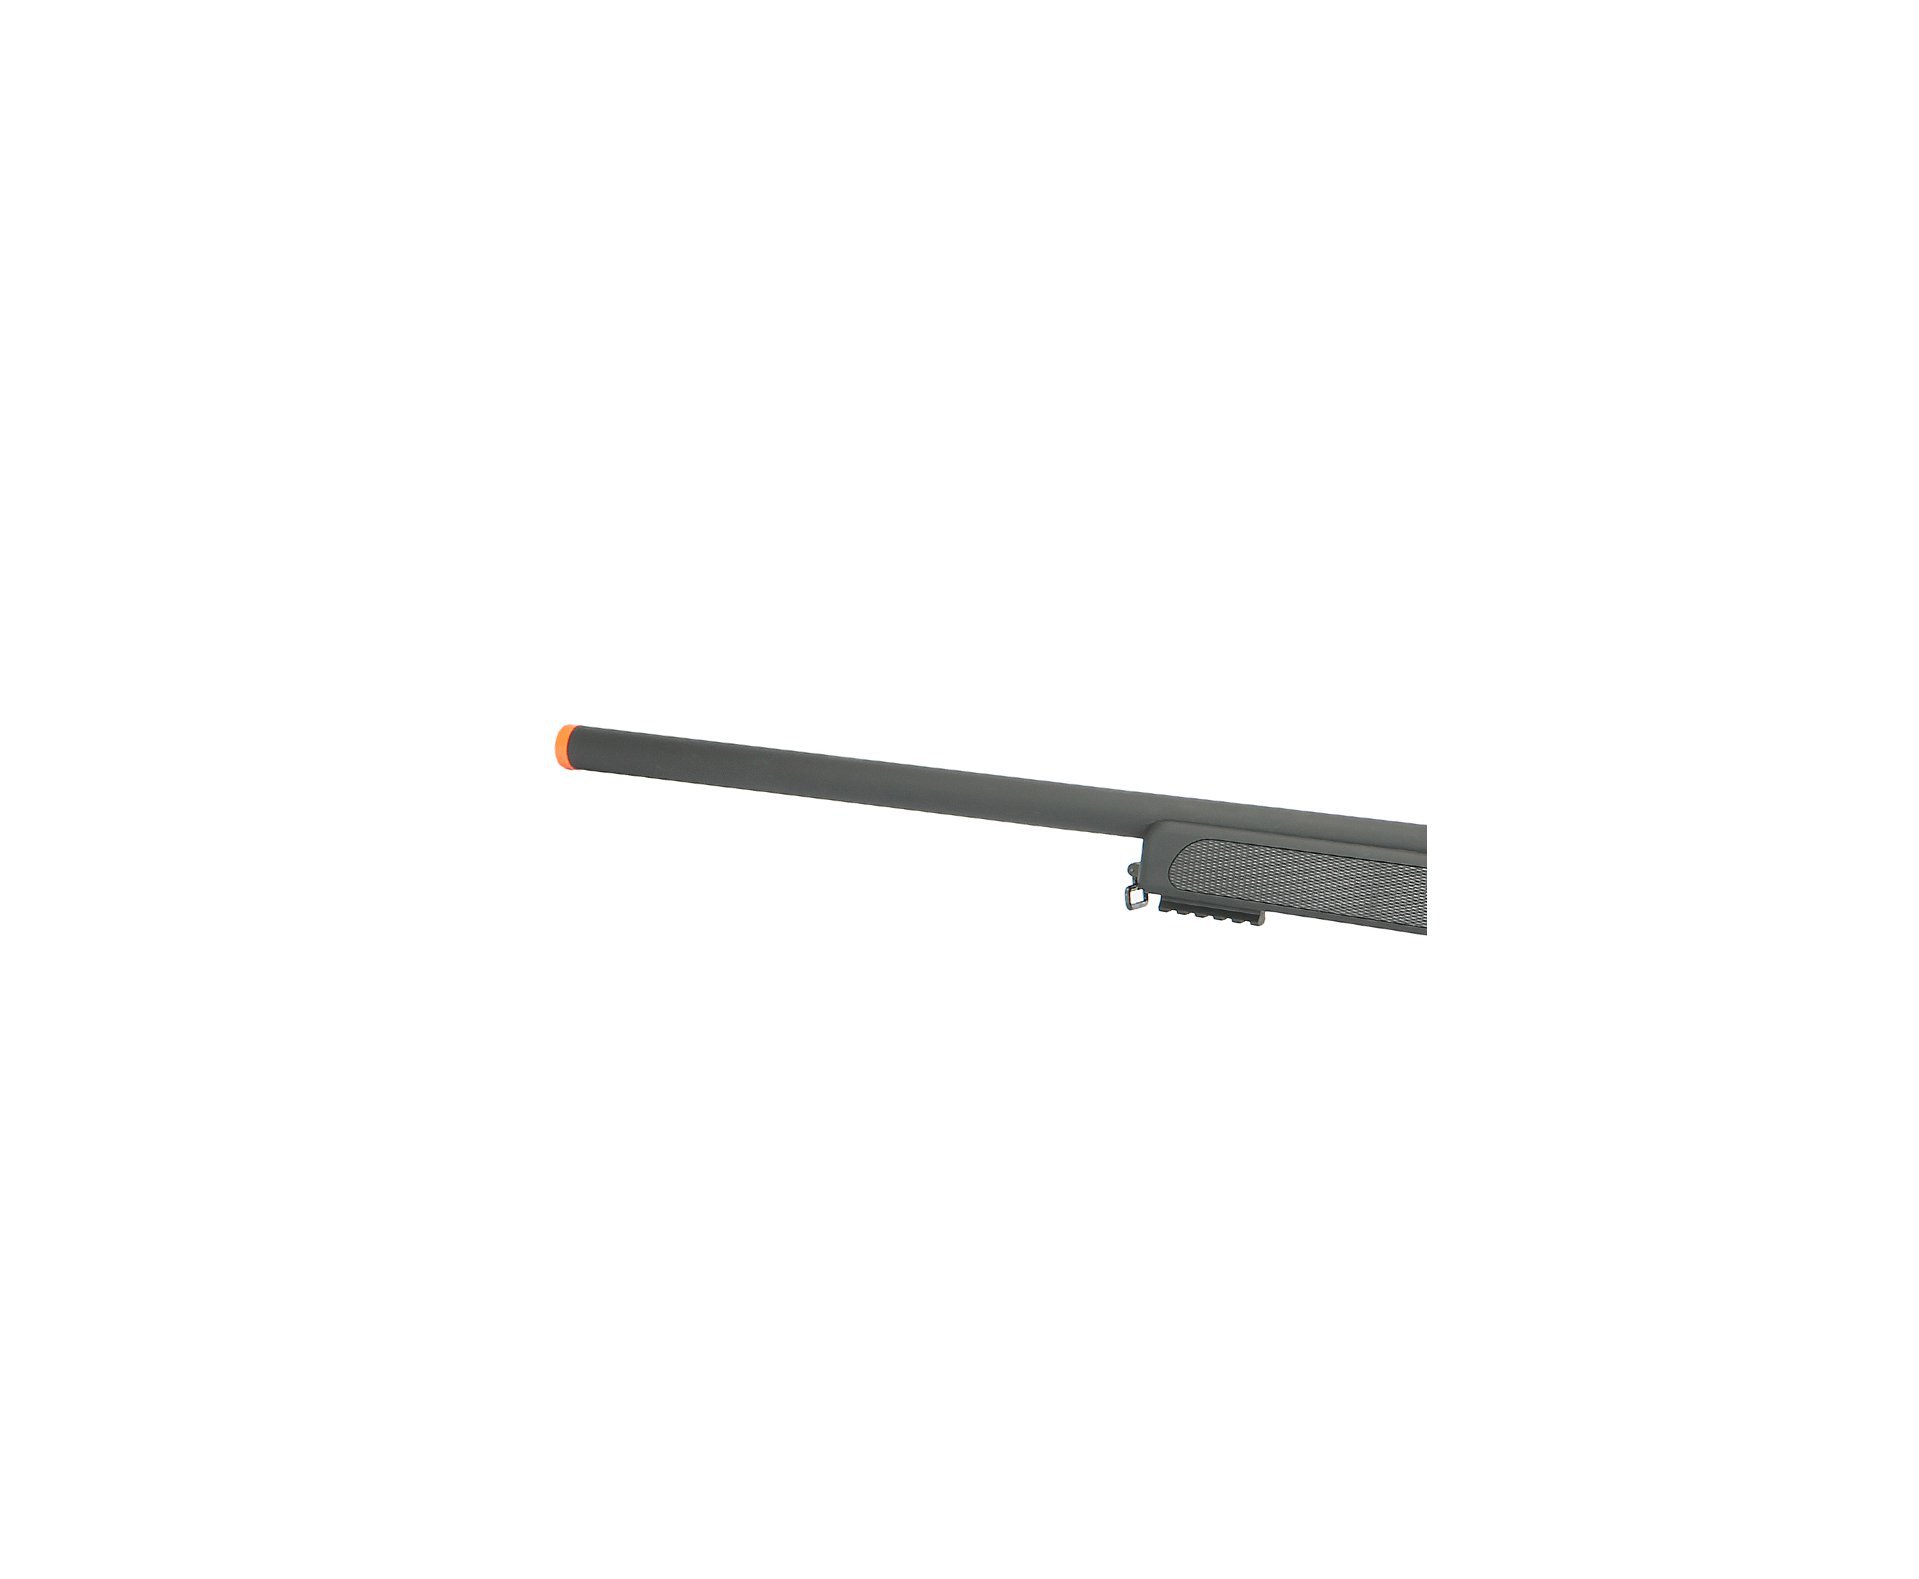 Rifle De Airsoft  Sniper Black Eagle M6 Spring 6,0mm - Swiss Arms